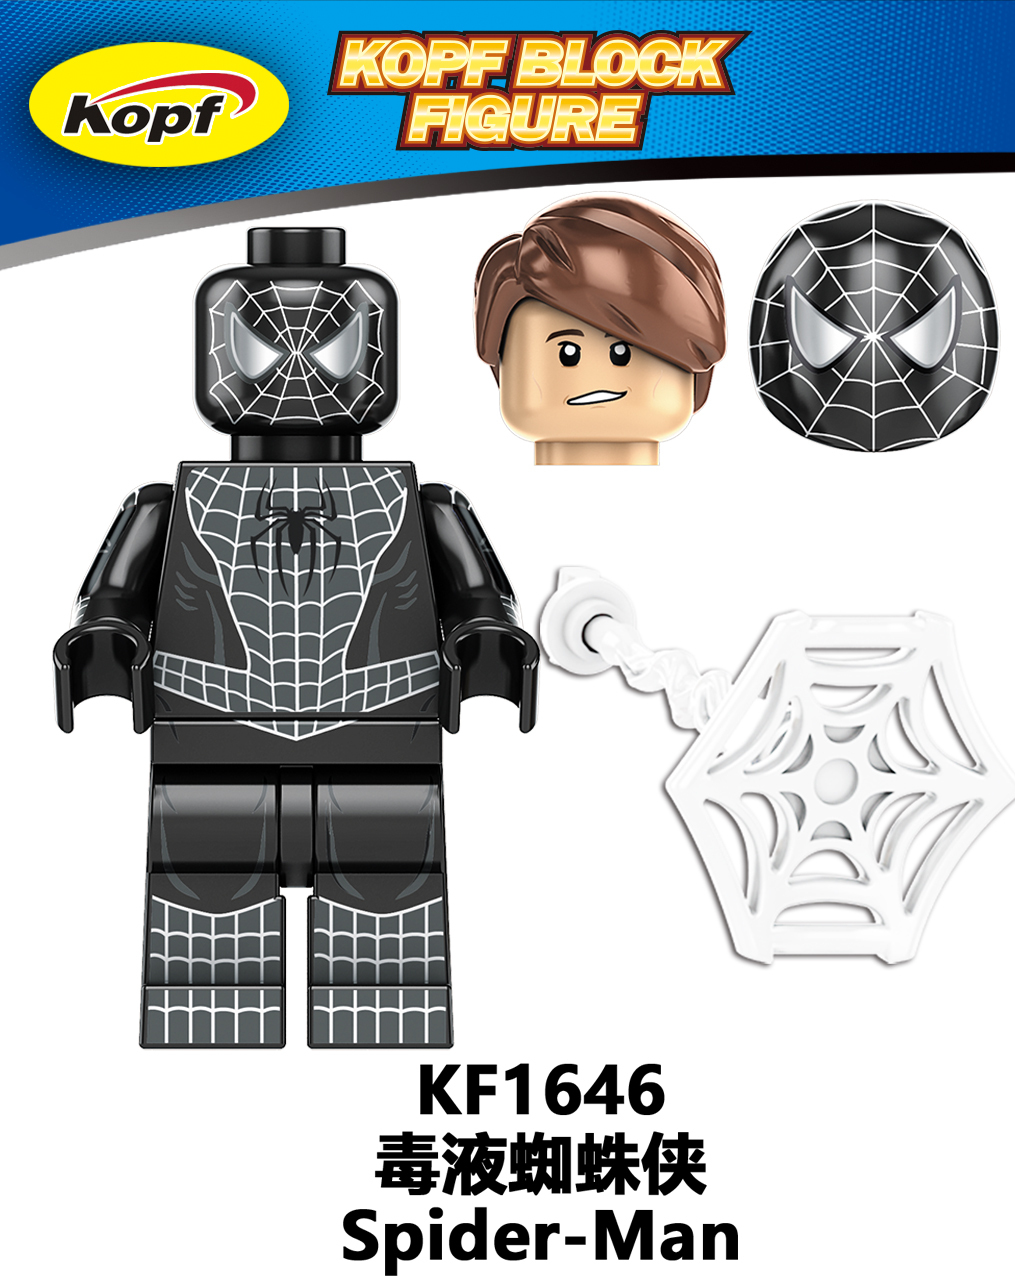 KF1641 KF1642 KF1643 KF1644 KF1645 KF1646 KF1647 KF1648 KF6153 Spiderman Super Heroes Movie Series Characters Bricks Building Blocks Action Figures Educational Toys For Children's Gifts